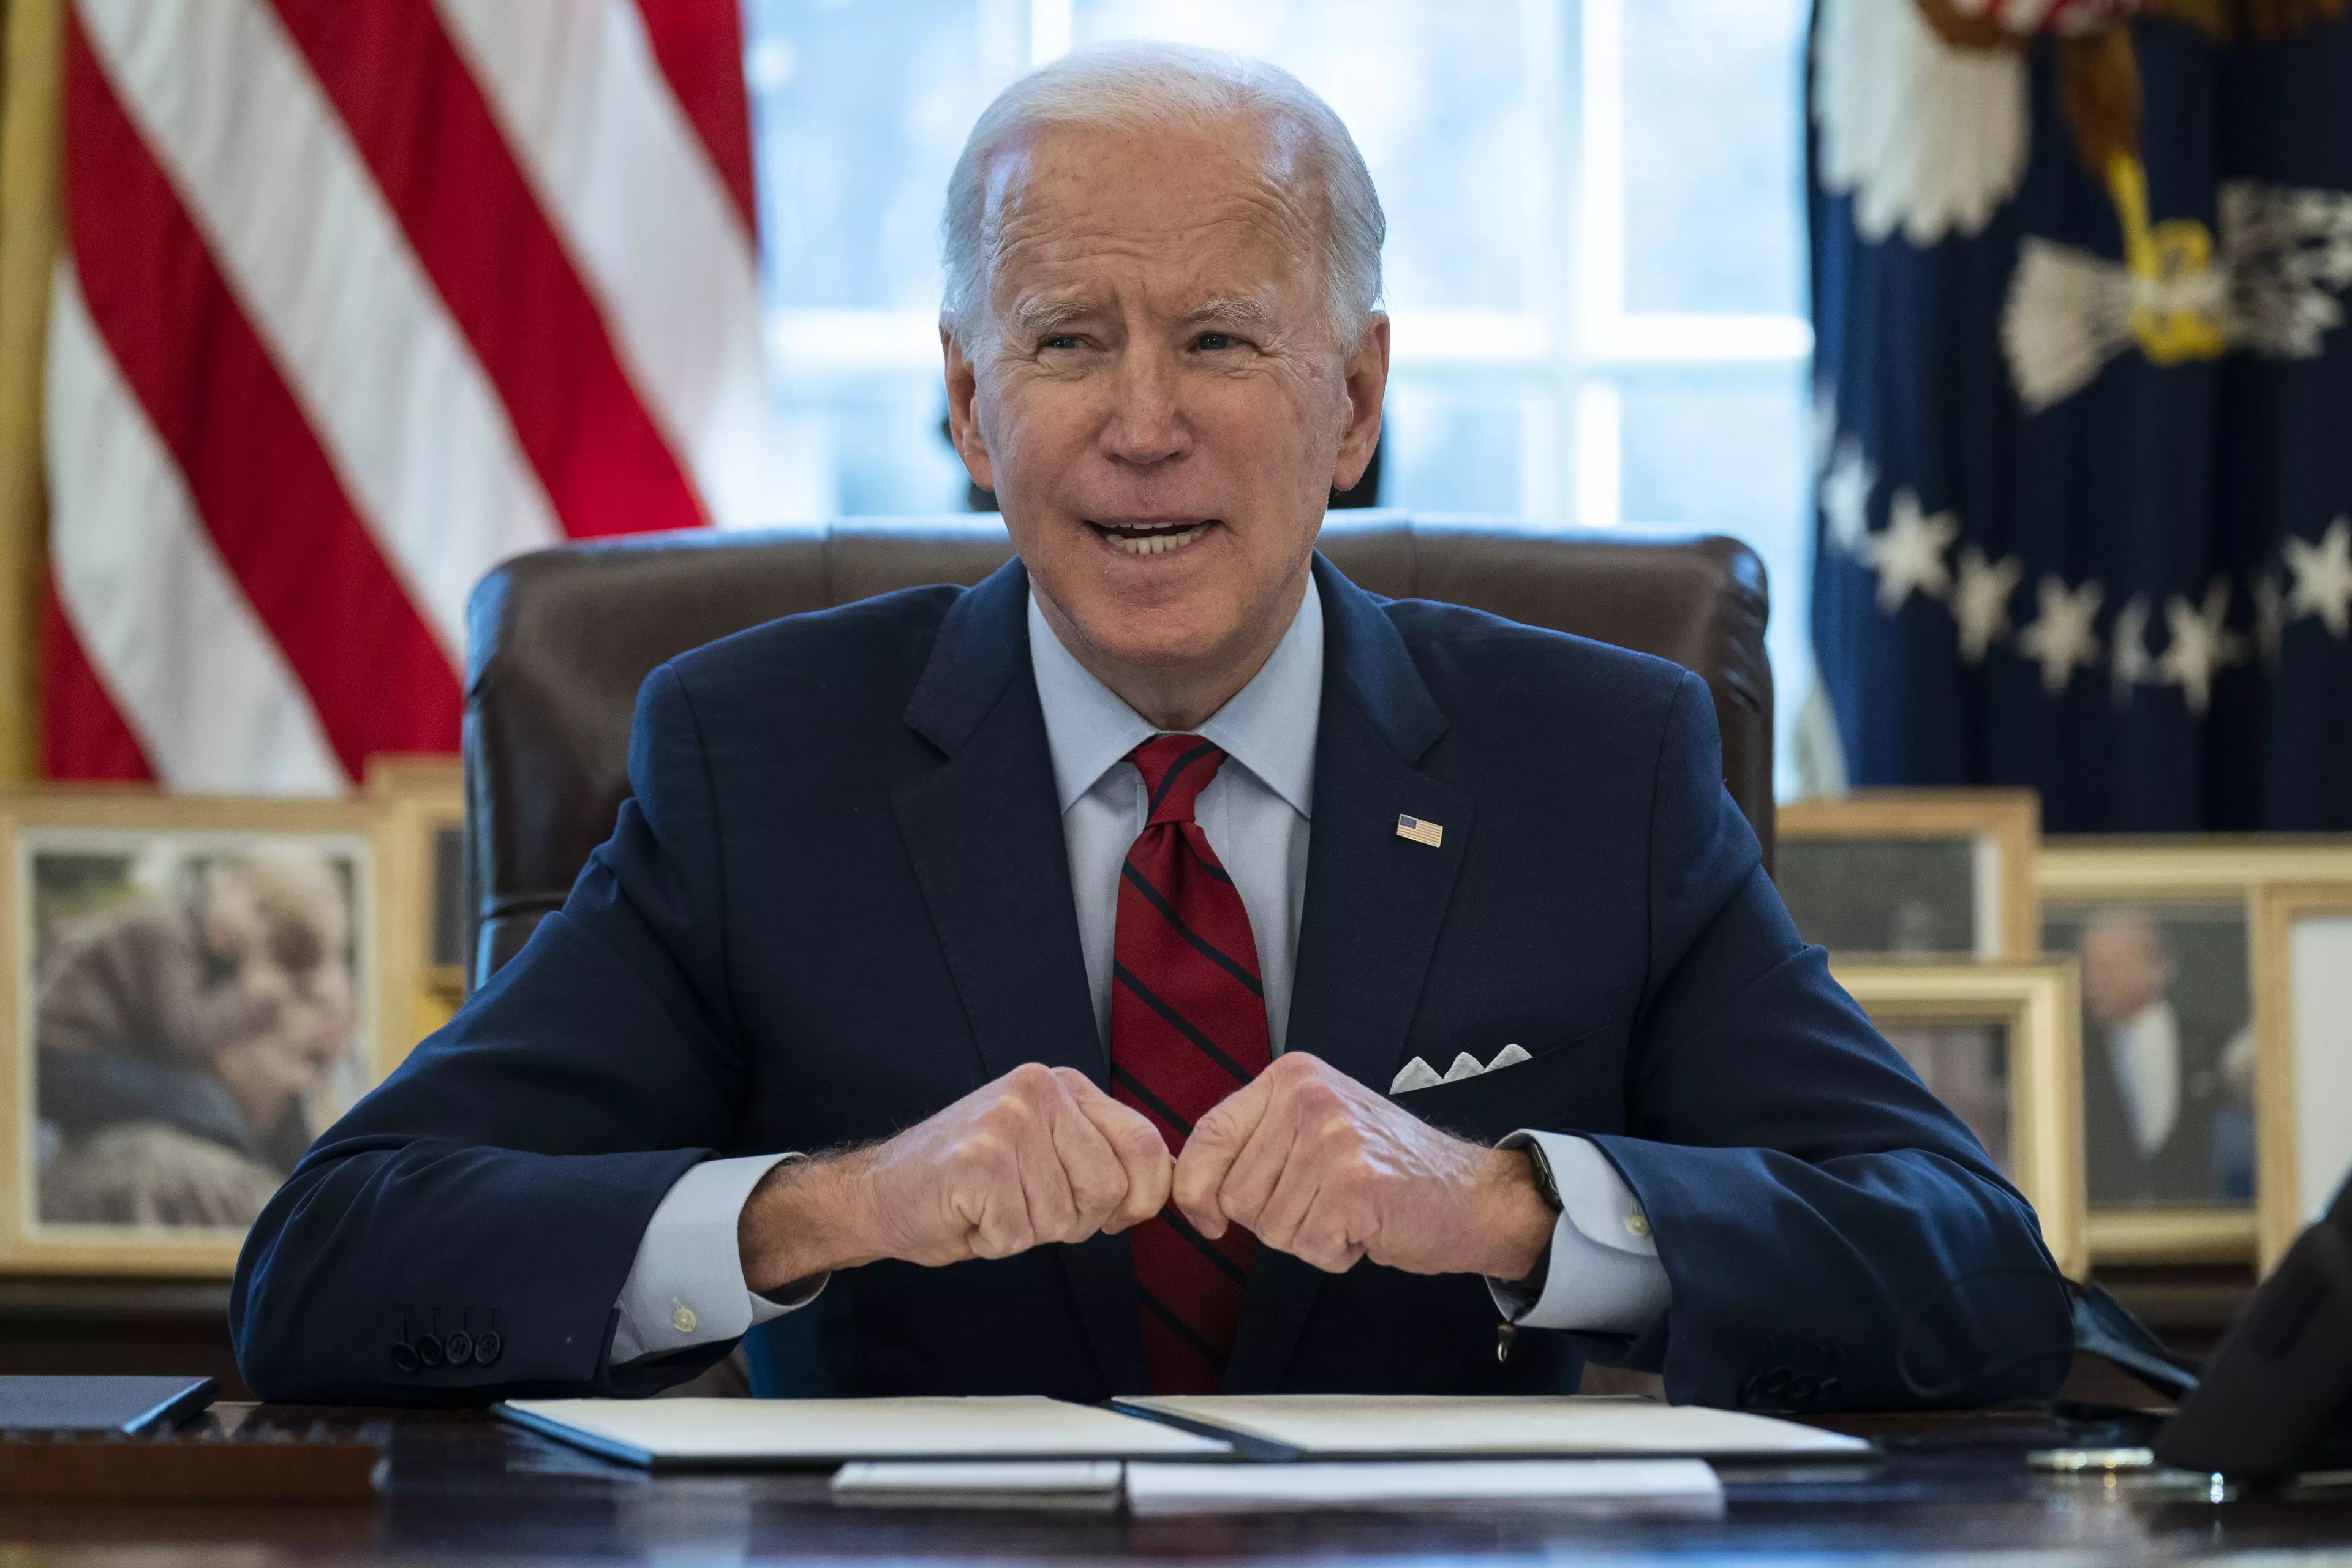 Joe Biden could save the lives of 49 federal death row inmates.